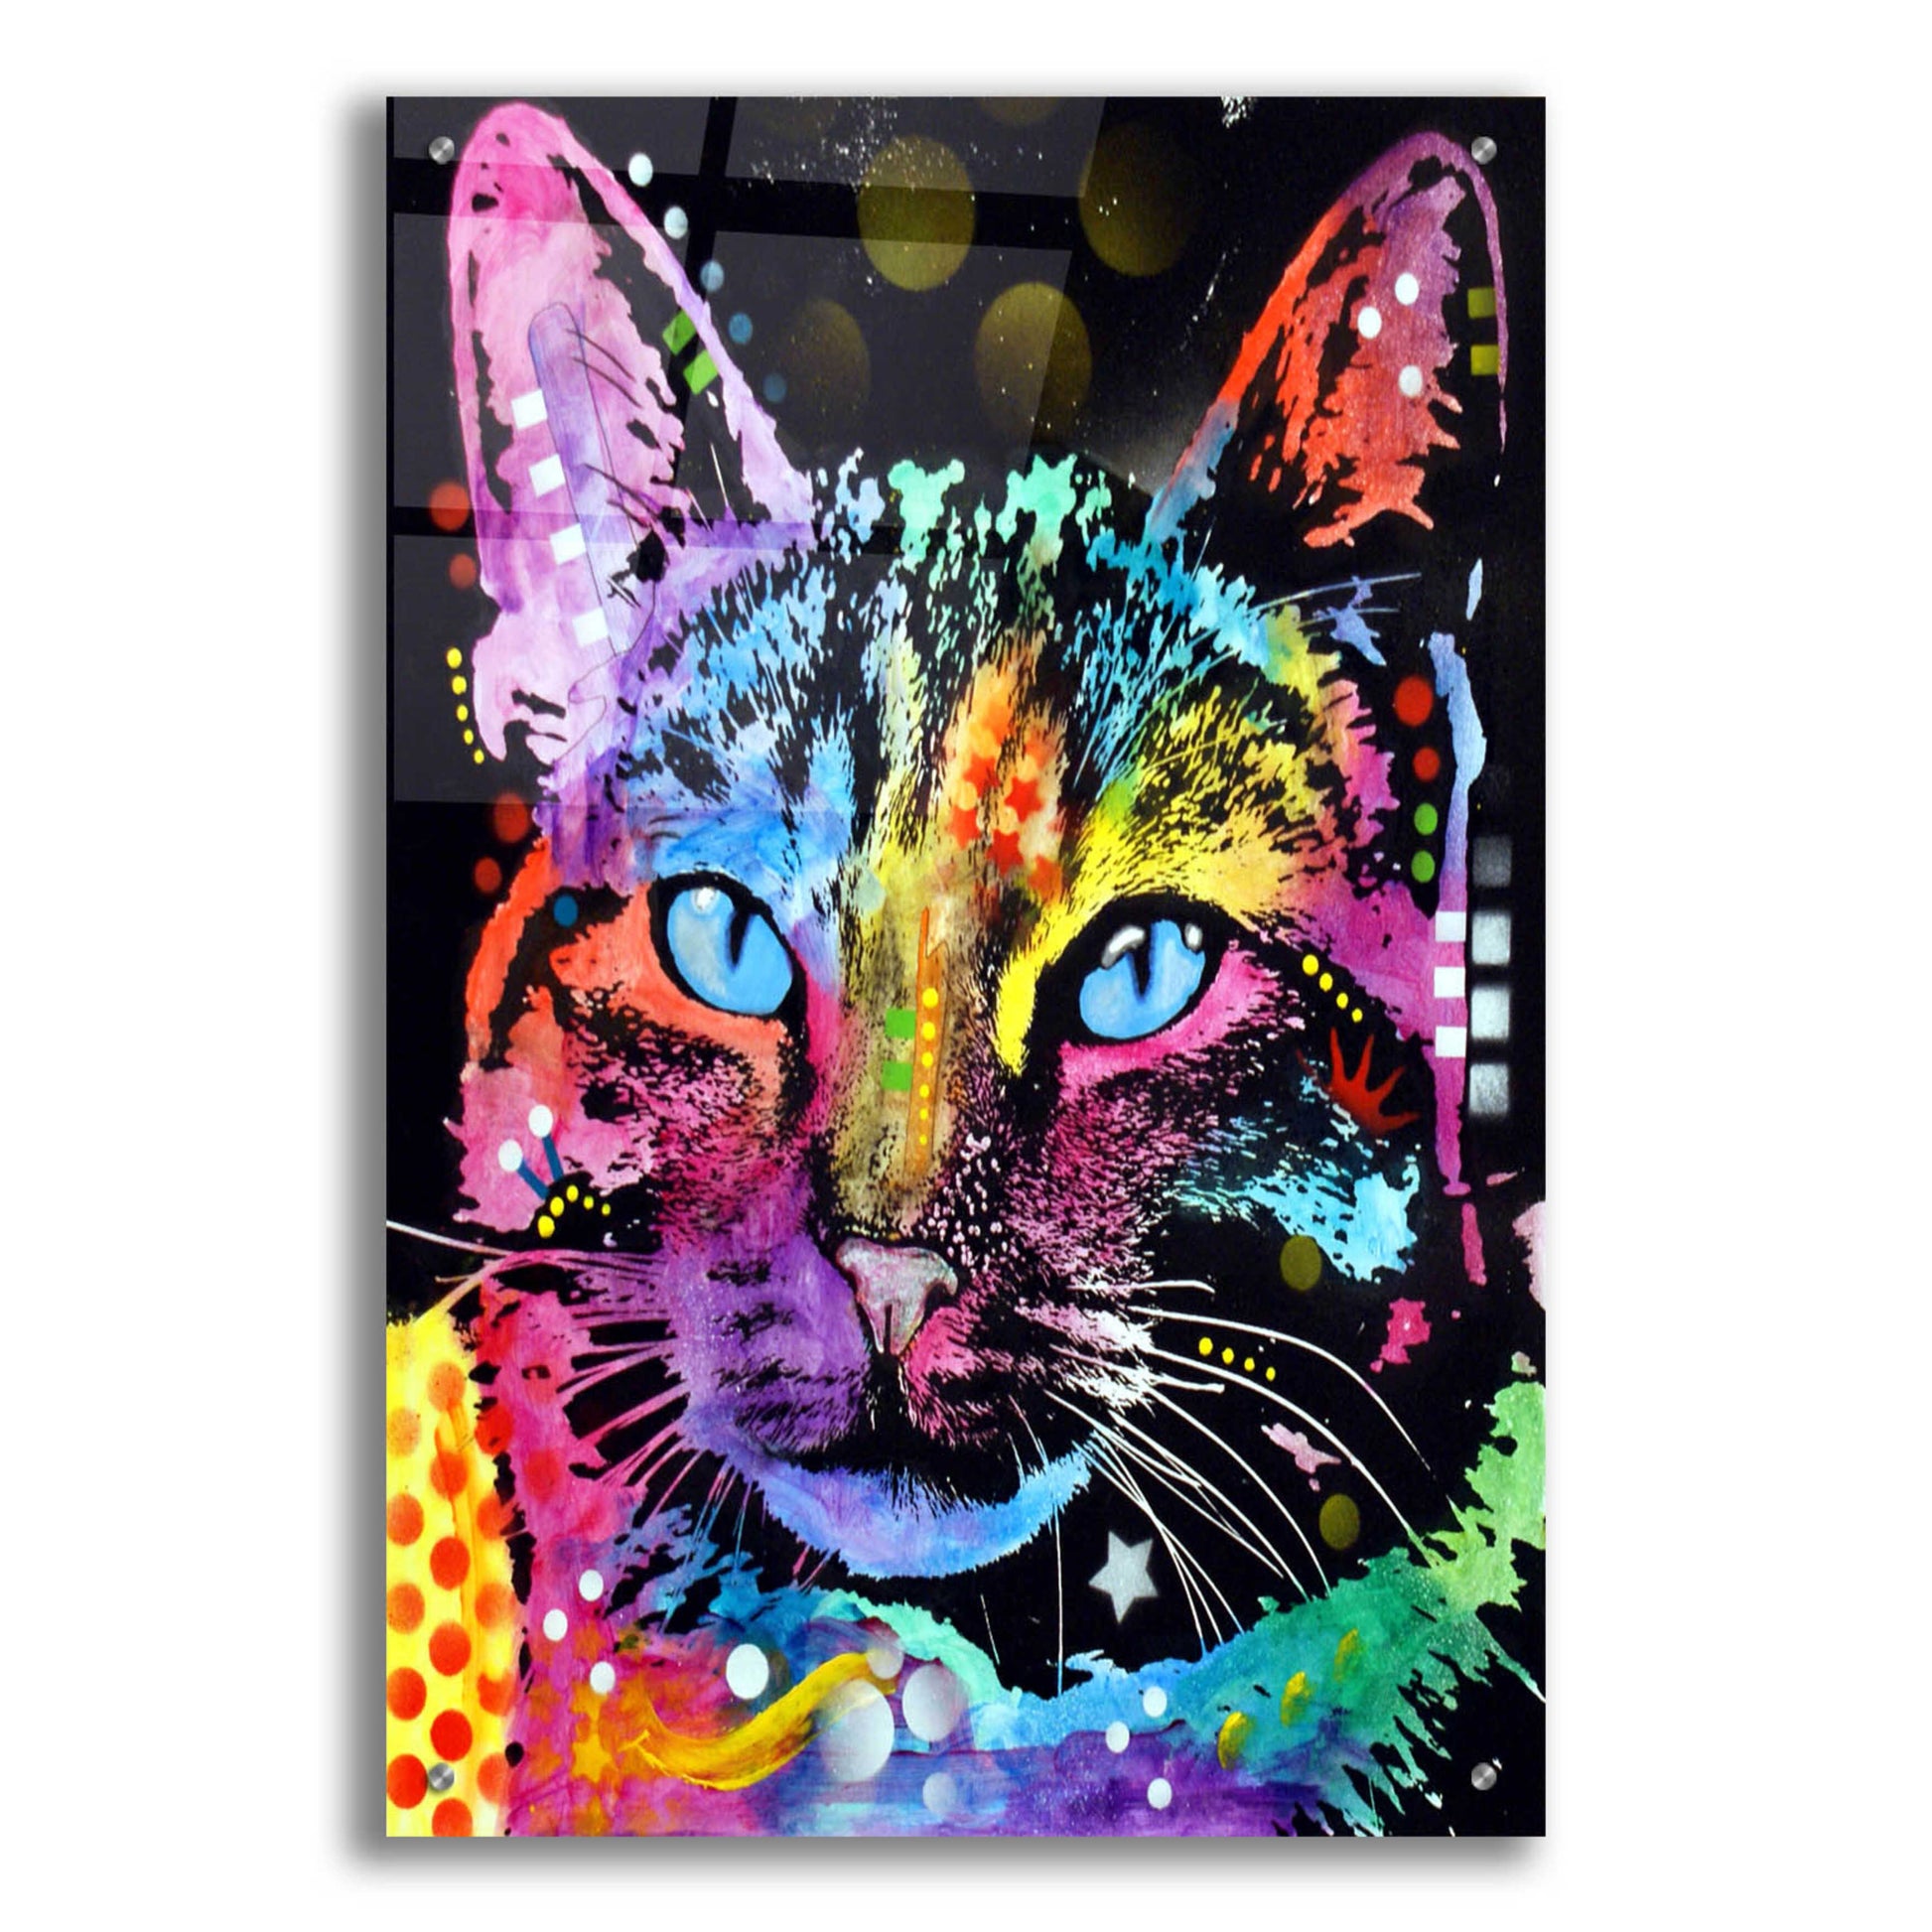 Epic Art 'Thoughtful Cat' by Dean Russo, Acrylic Glass Wall Art,24x36